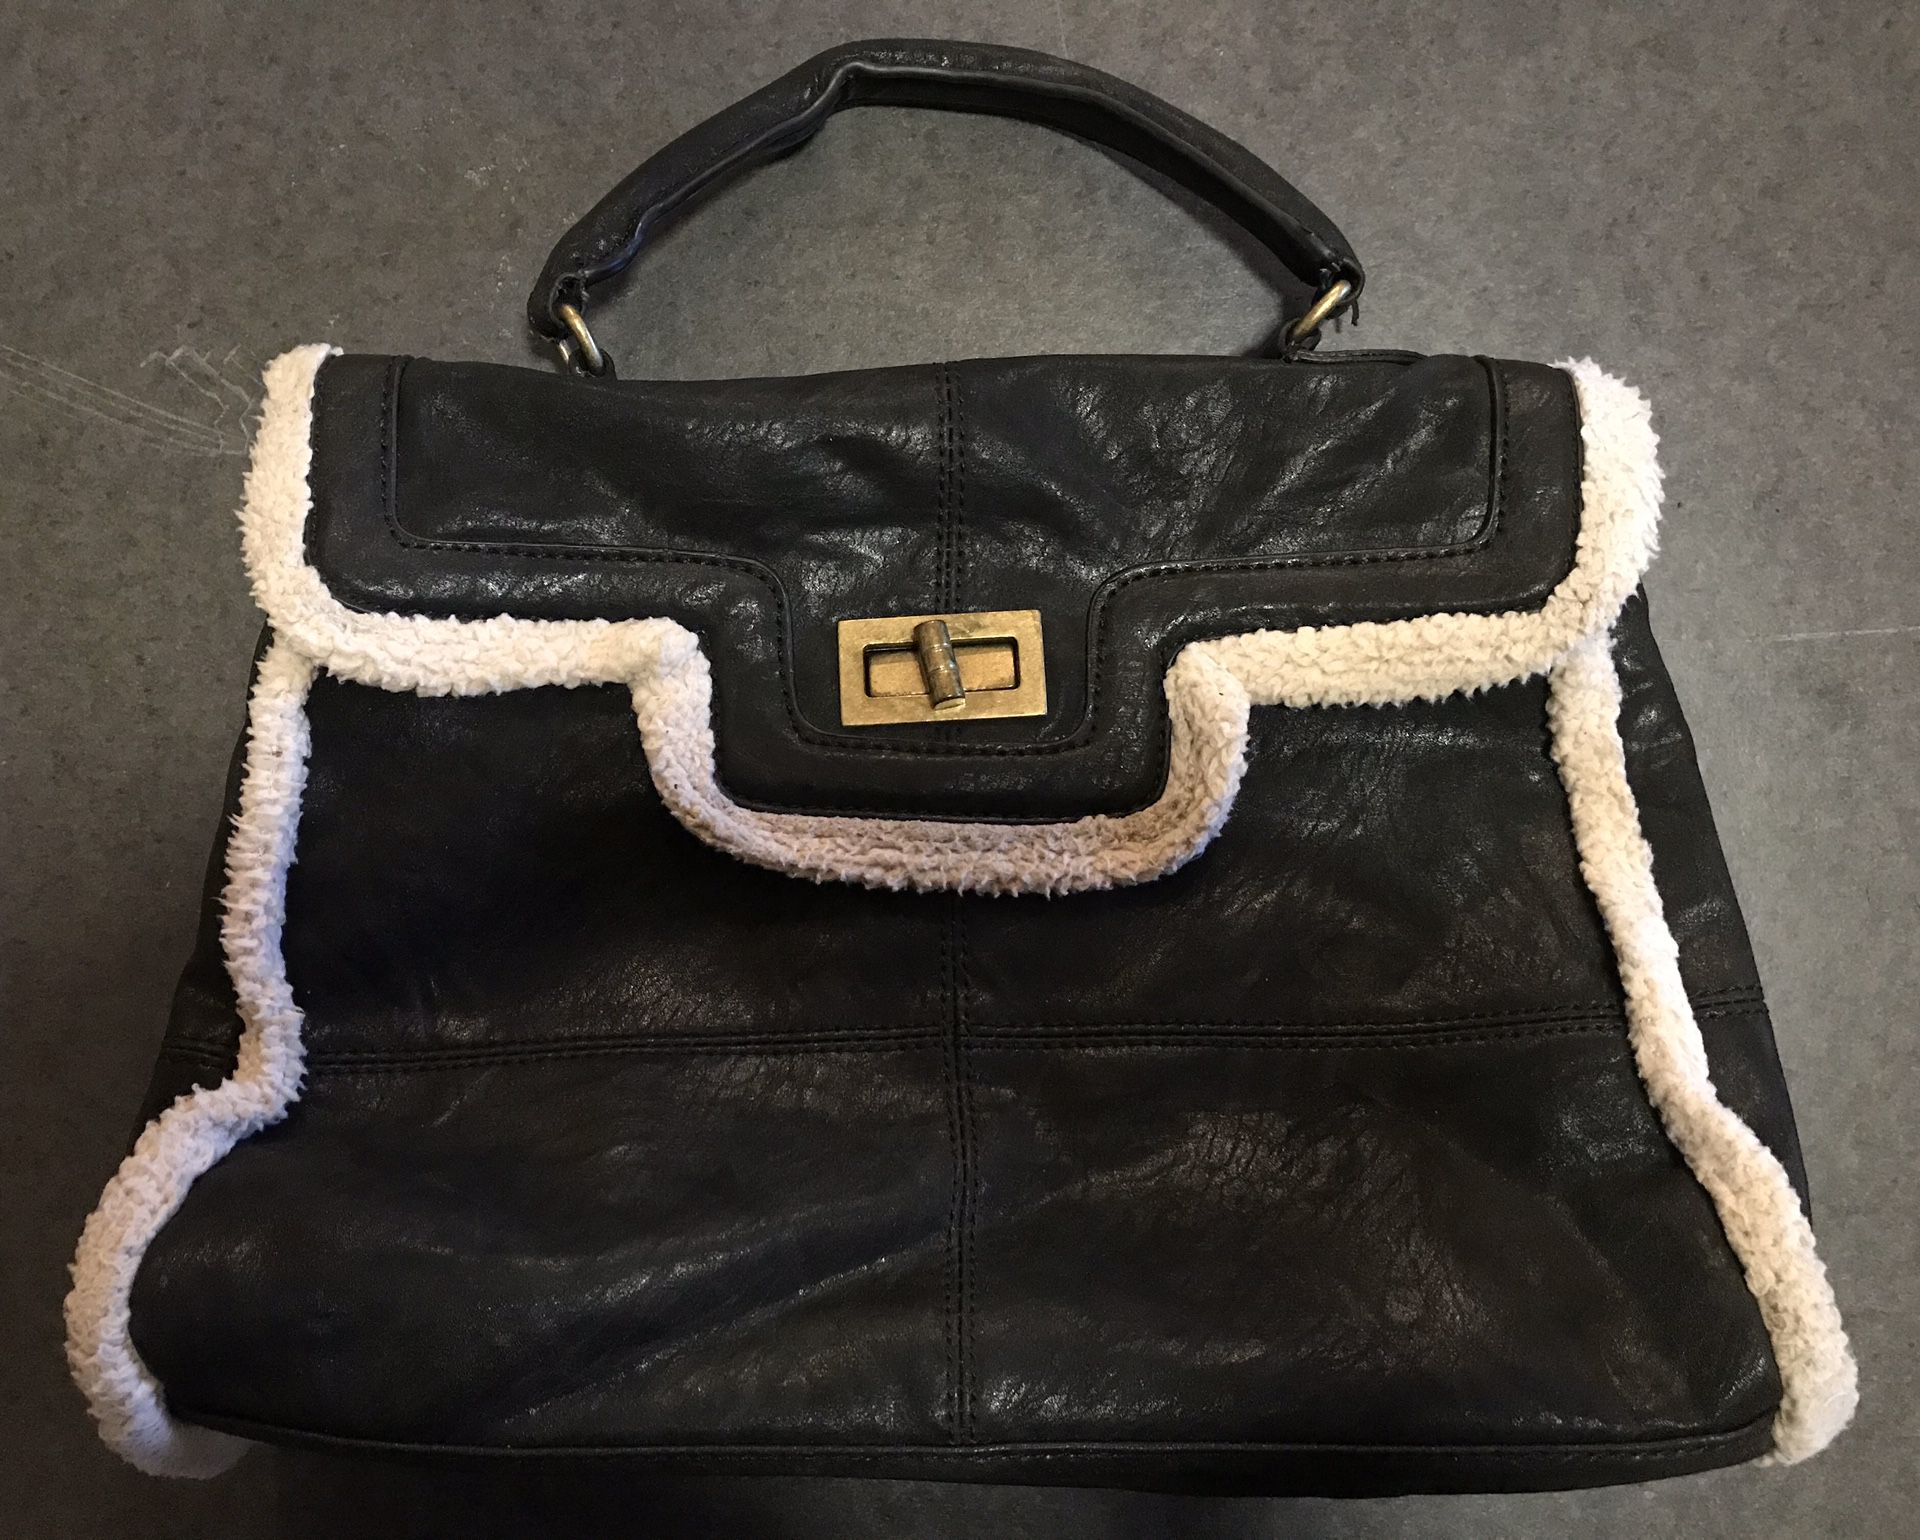 Real Nice Ladies Louis Vuitton Bag And Purse for Sale in North Las Vegas,  NV - OfferUp